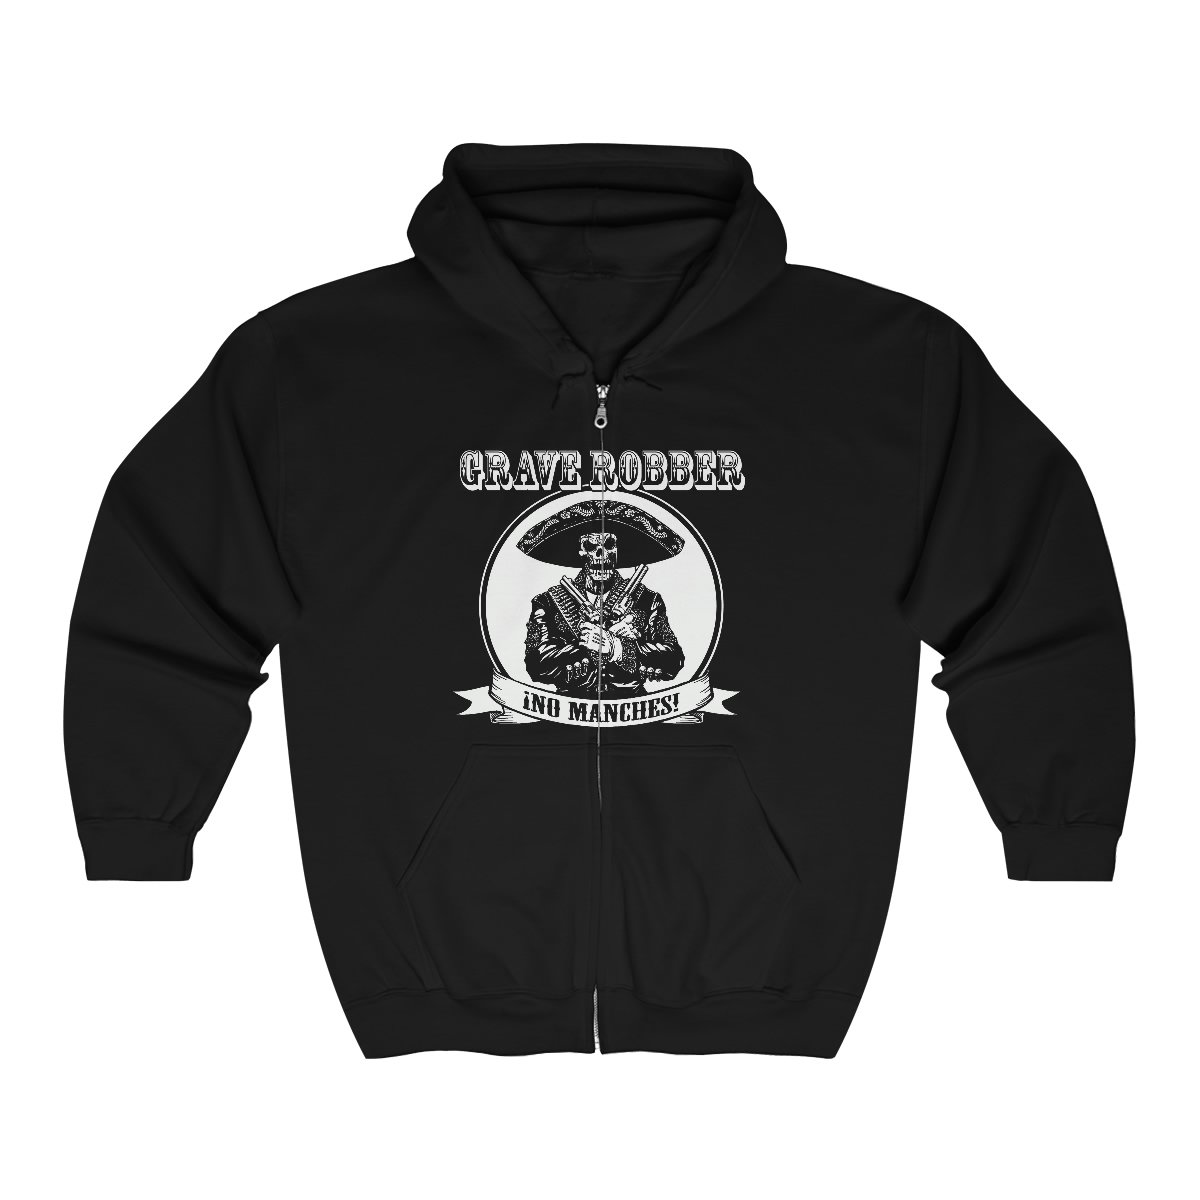 Grave Robber No Manches! Full Zip Hooded Sweatshirt